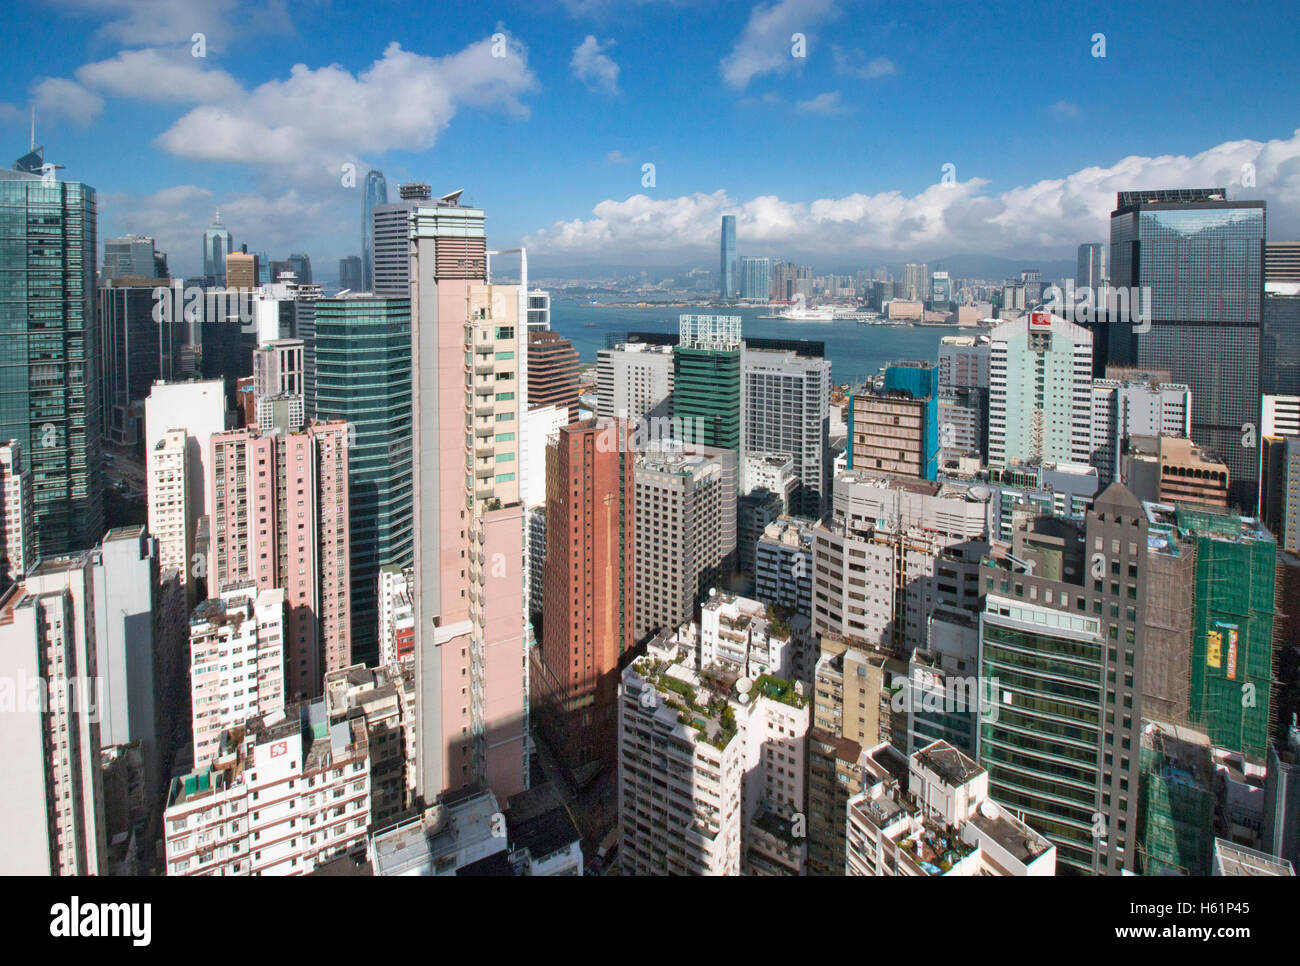 Skyscrapers business center of Hong Kong Island Wan Chai China Asia seen from rooftop terrace. Stock Photo